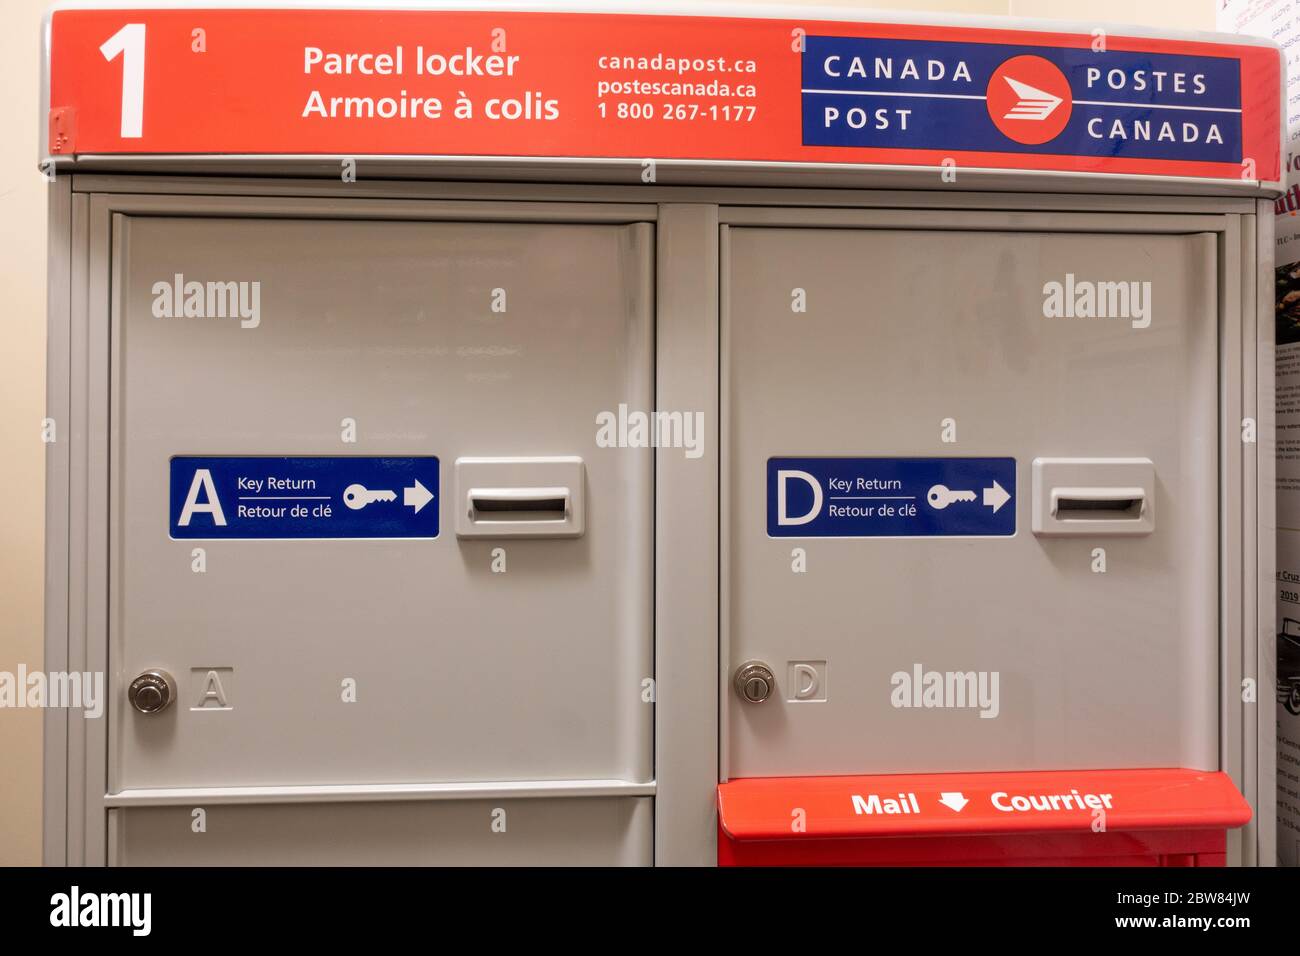 A New Design Canada Post Parcel Locker In An Apartment Building For Large Package Deliveries Stock Photo